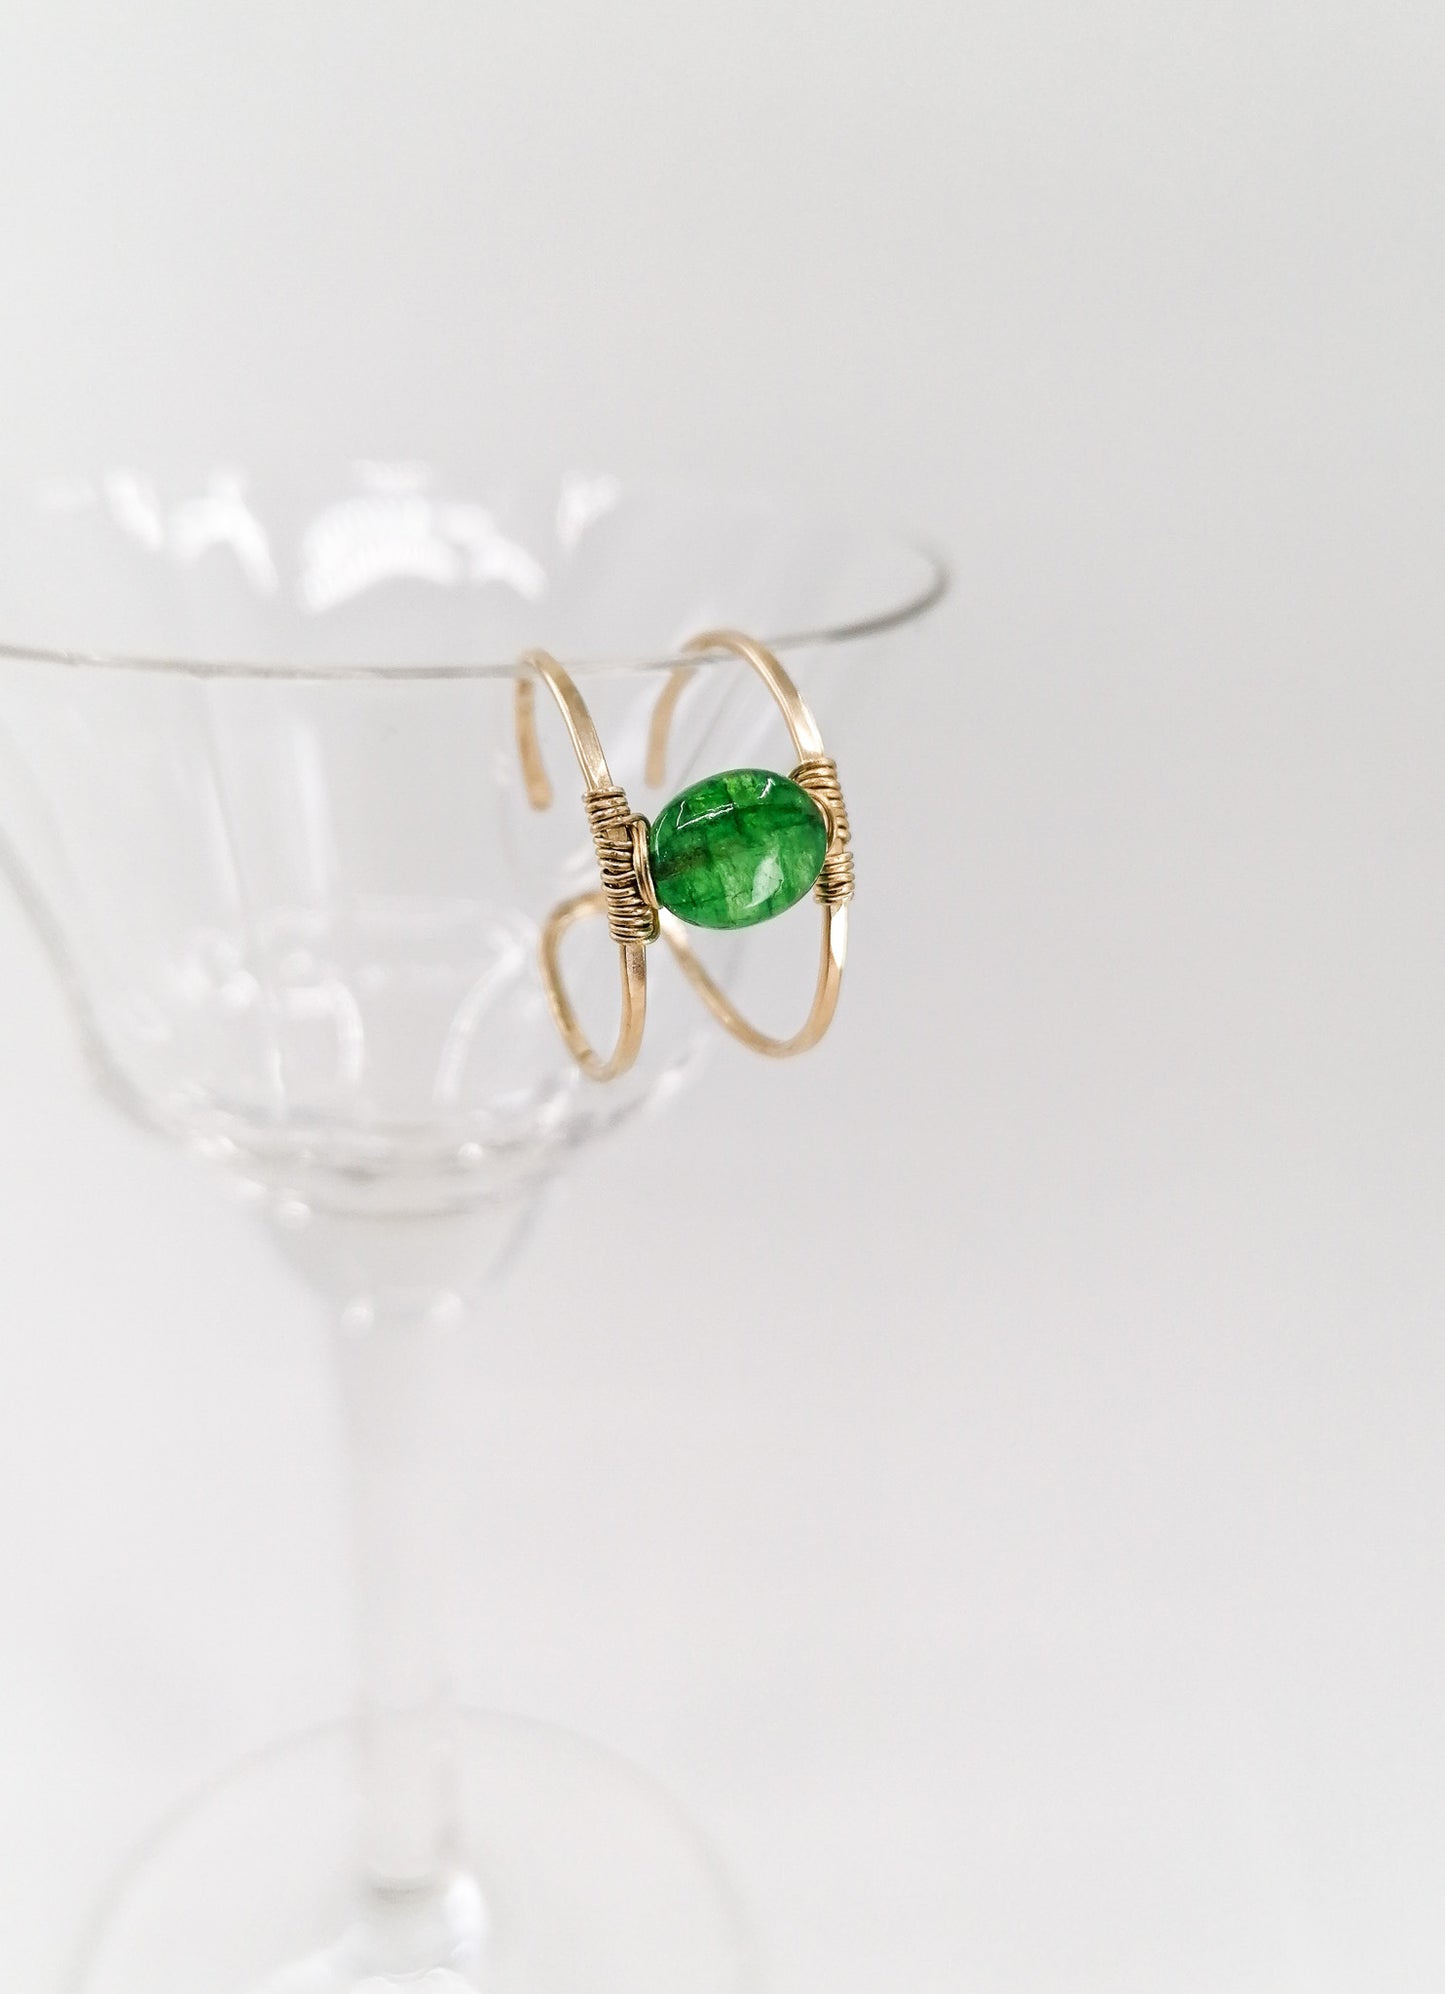 Emerald double ring